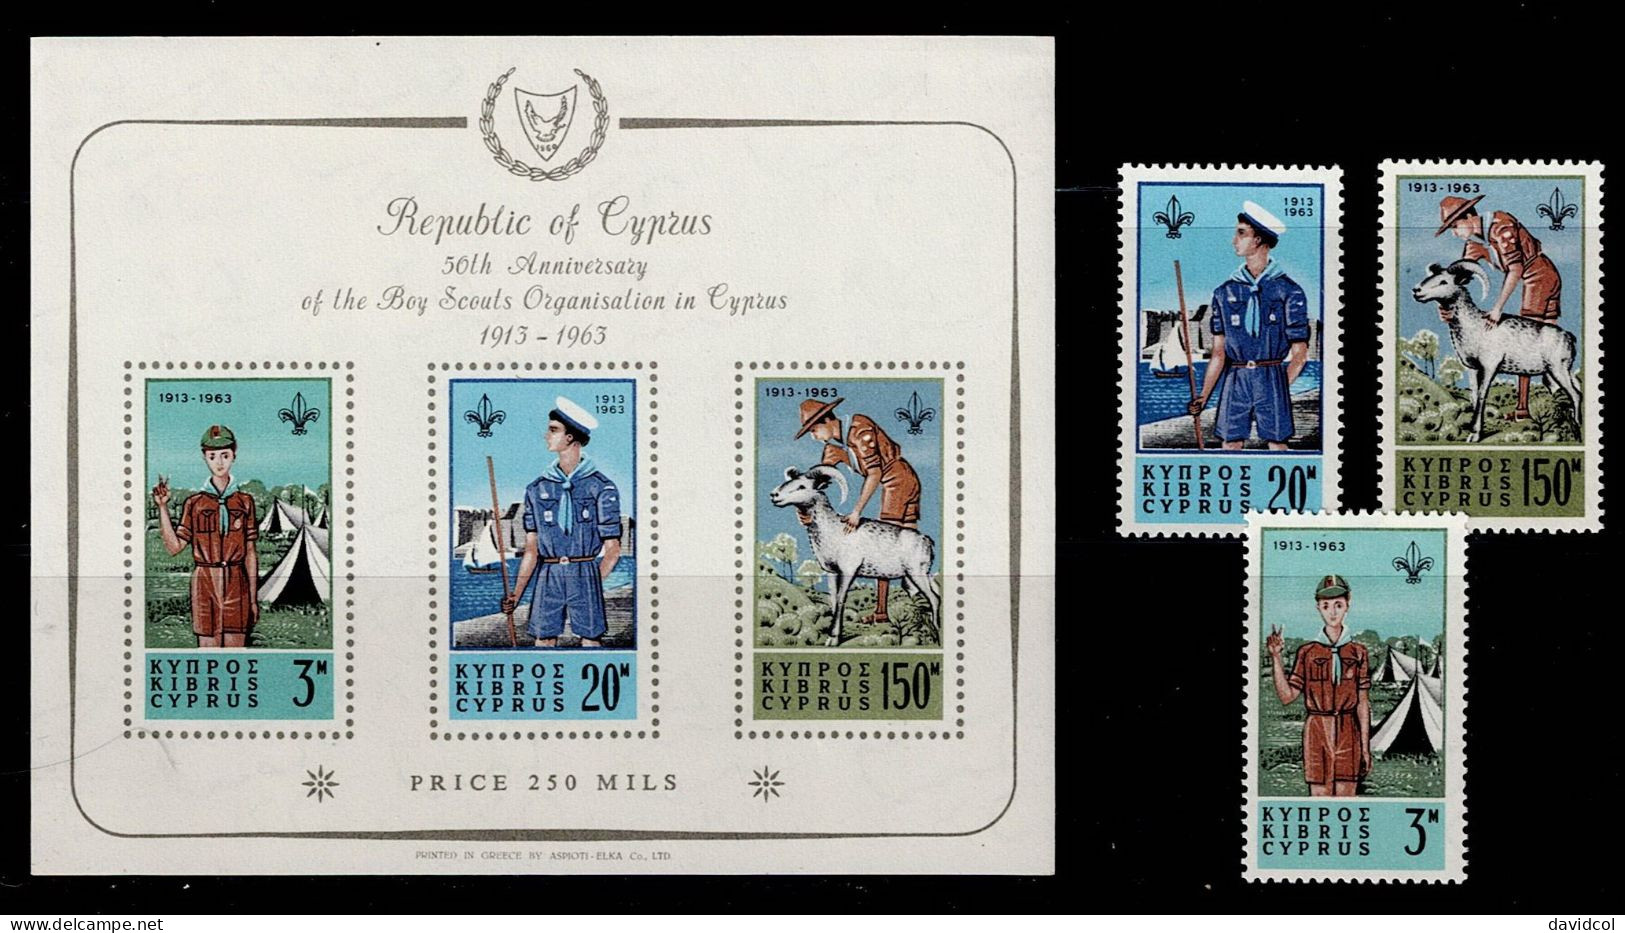 CHP-02- CYPRUS - 1963 - MNH -SCOUTS- 50TH ANNIVERSARY BOY SCOUTS OF CYPRUS - Nuevos